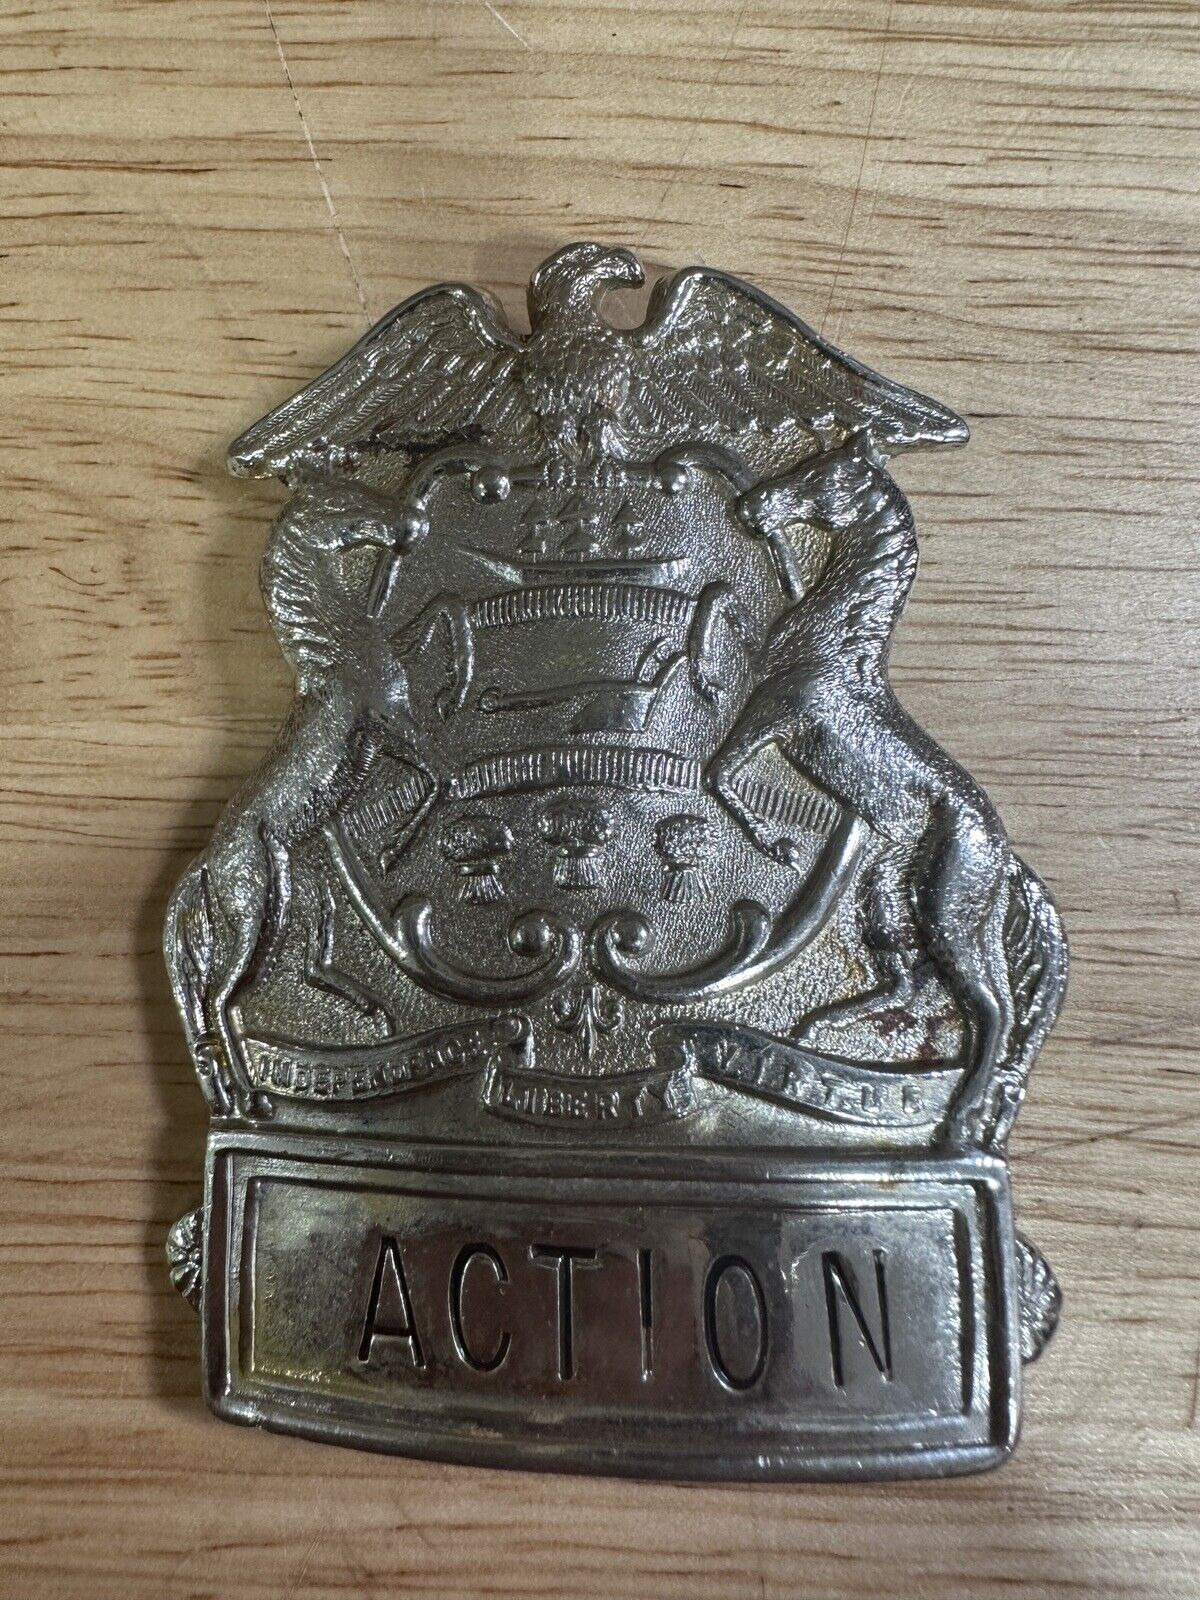 Rare Obsolete Unmarked York Pa Department Captain Template Badge “Action”